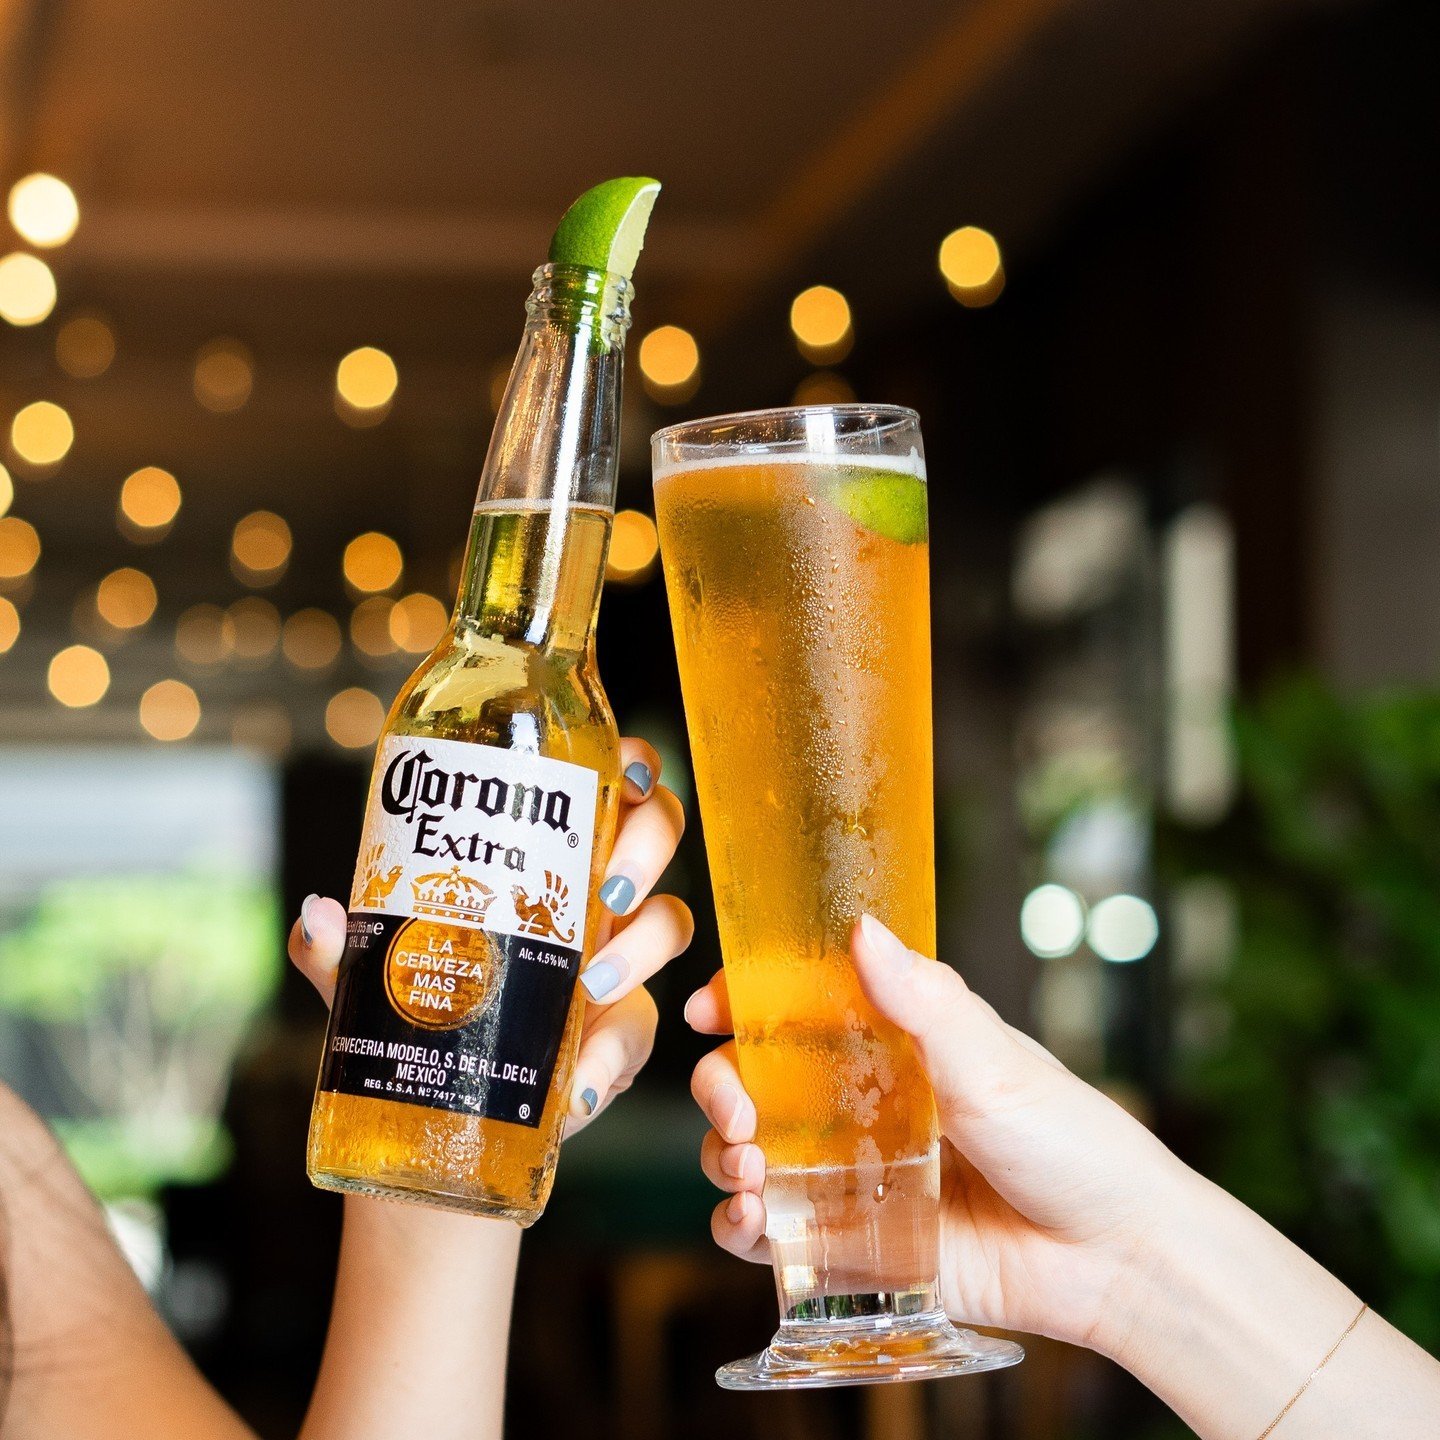 Salud to the end of the week! Our two fabulous locales at Robertson Quay and Customs House are now open on Sundays, ready to cater to your thirst-quenching needs this weekend. So why not mosey on down, snag a beer, and relax with your amigos y famili